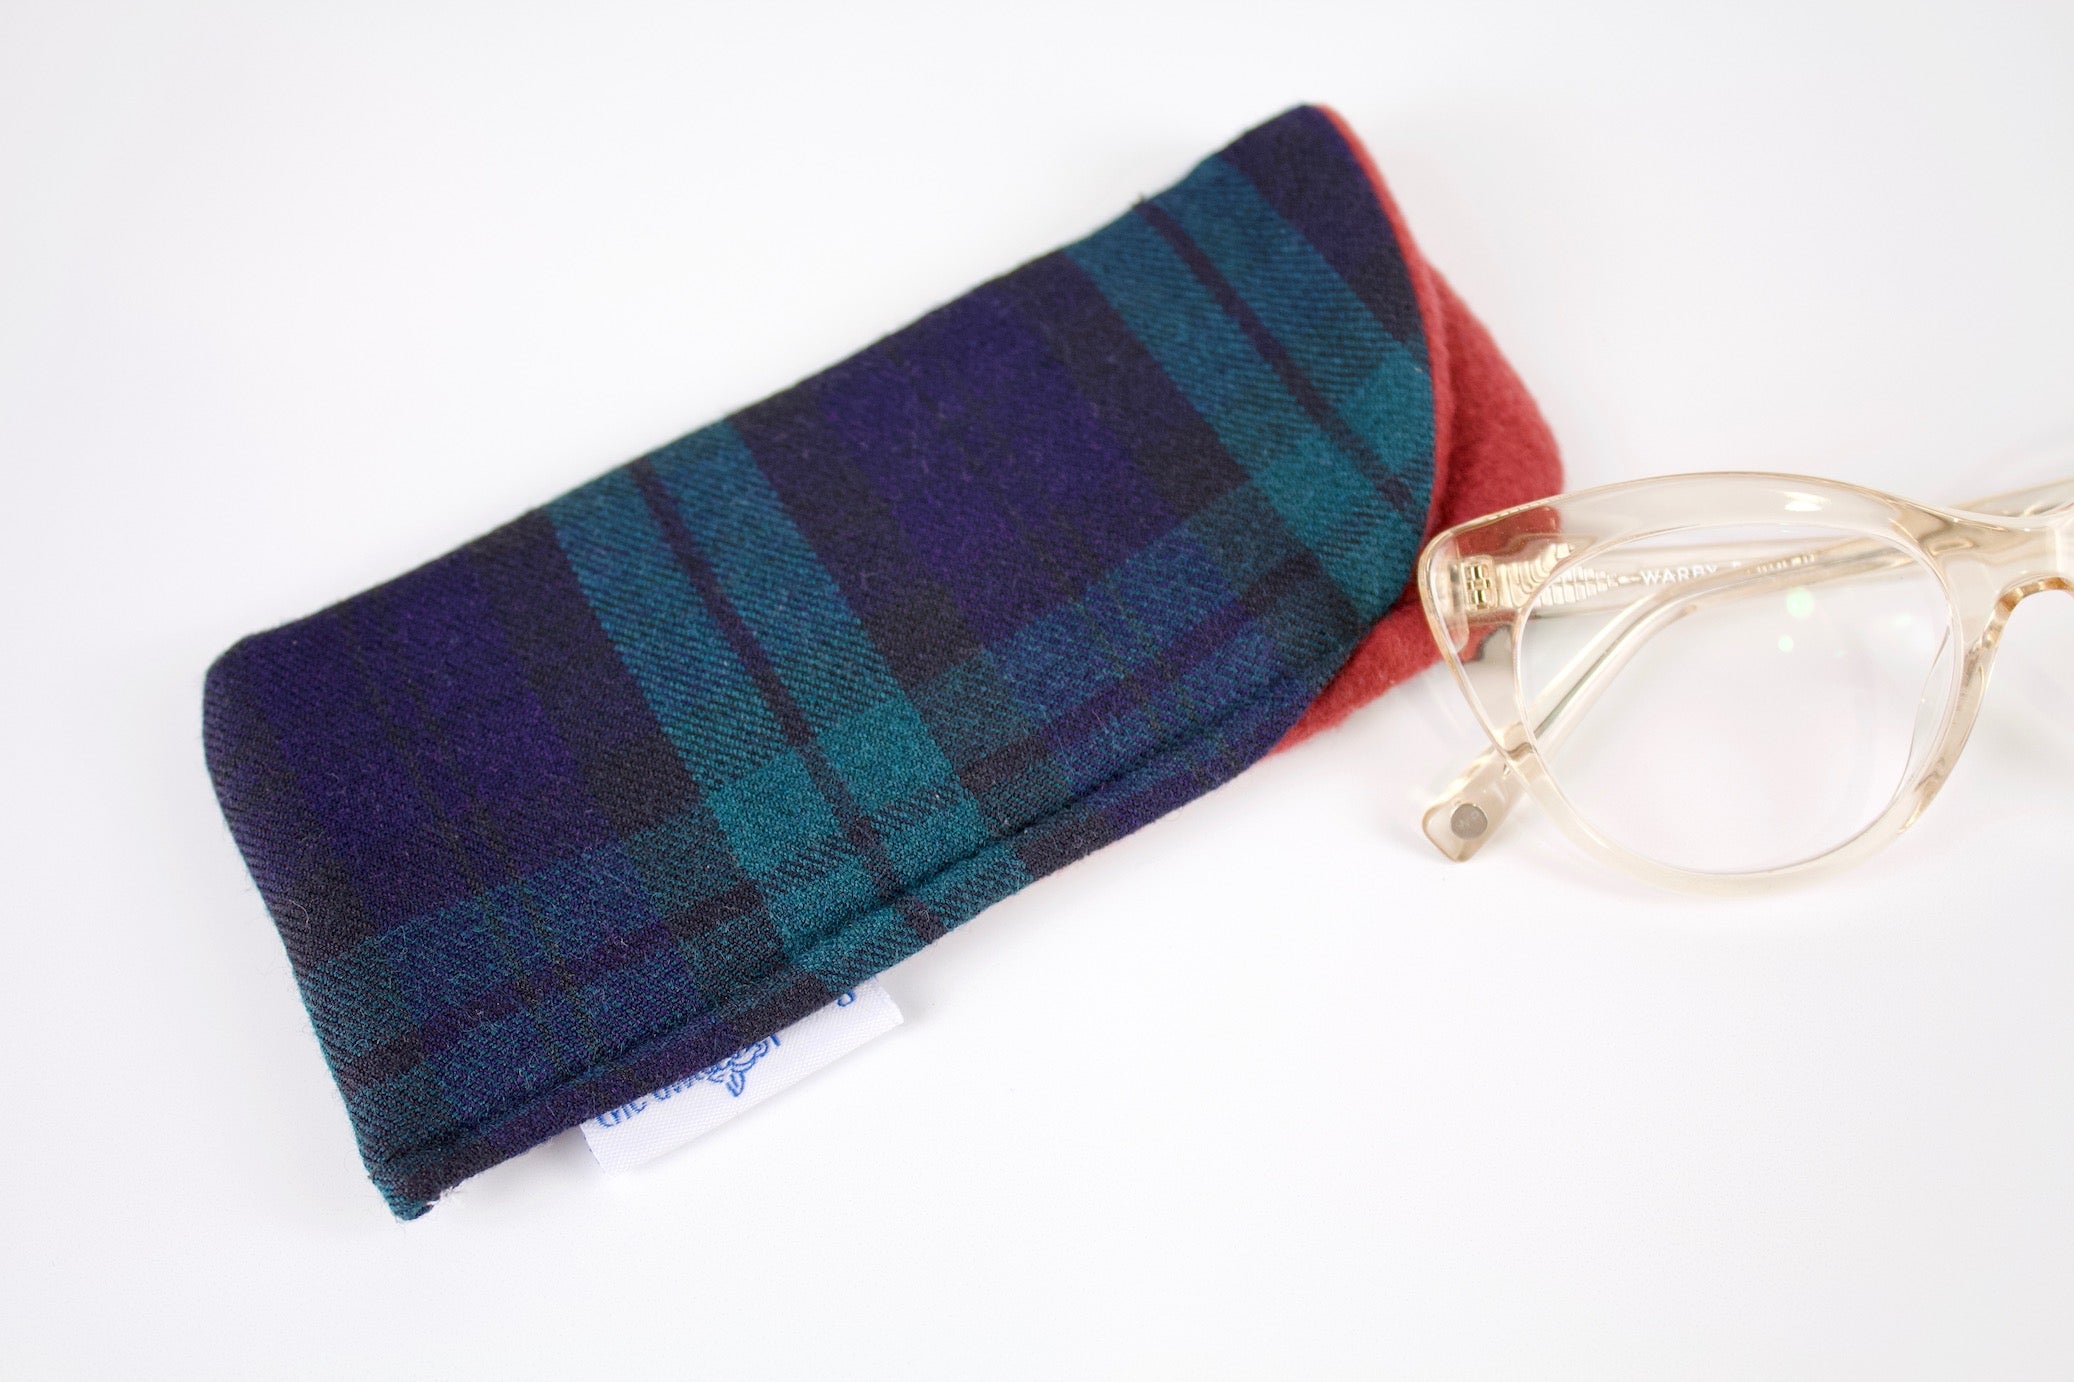 Black Watch Plaid Glasses Case-The Blue Peony-Category_Glasses Case,Color_Black,Color_Blue,Color_Green,Department_Personal Accessory,Pattern_Plaid